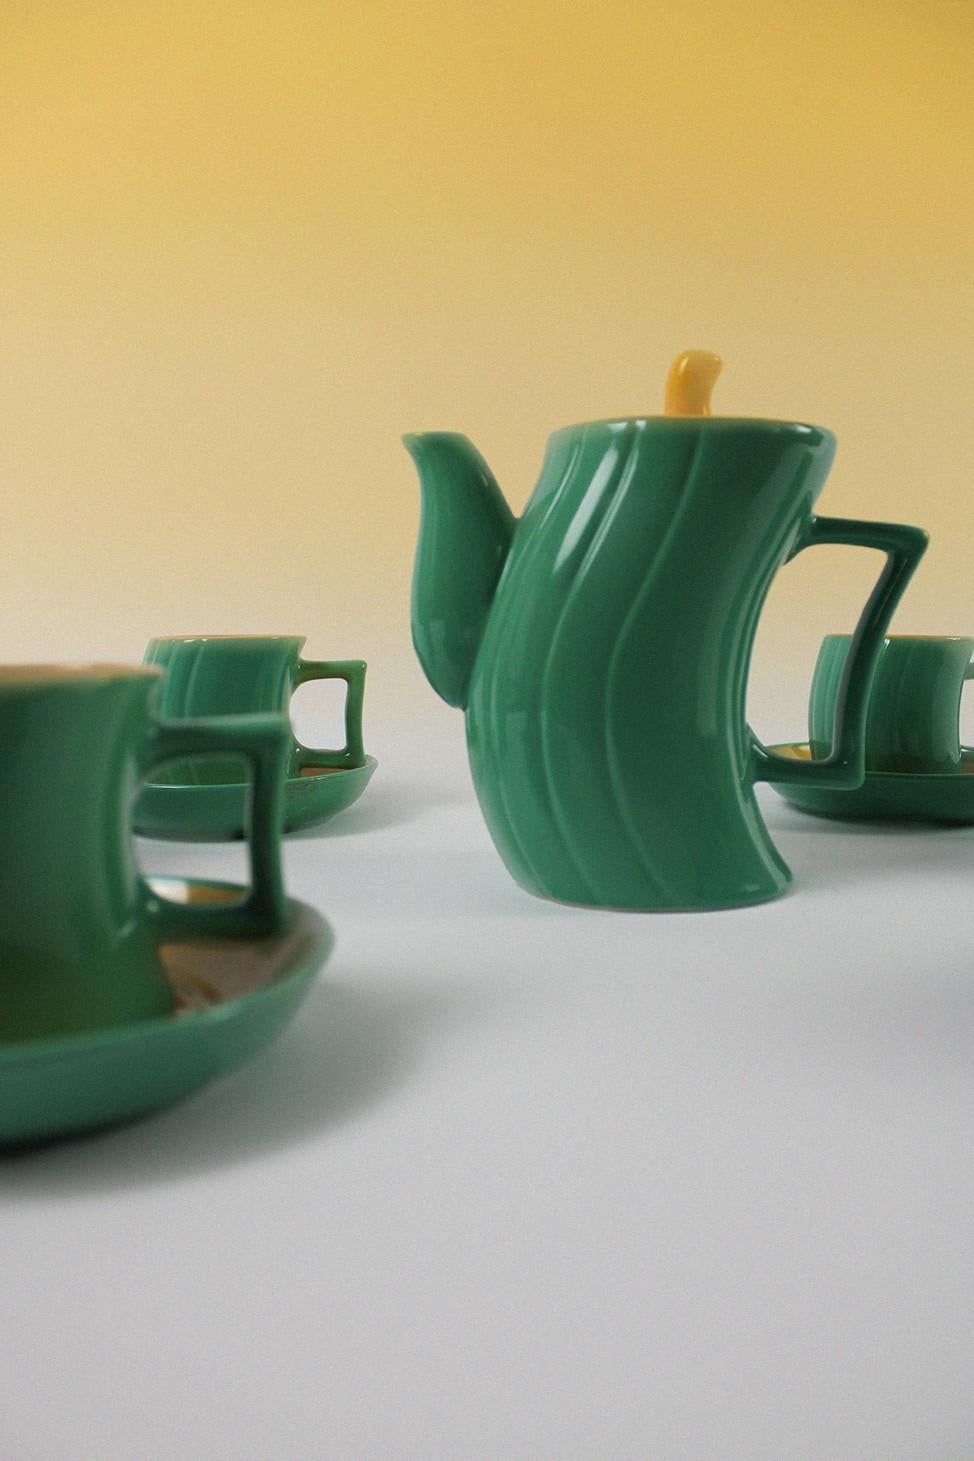 This undulating Tea set designed by Massimo Iosa Ghini for Naj Oleari is the perfect choice for an authentic touch of Avant Garde in your home. Its organic form lends itself to a surrealistic, almost fairy tale inspired aesthetic with its simple,